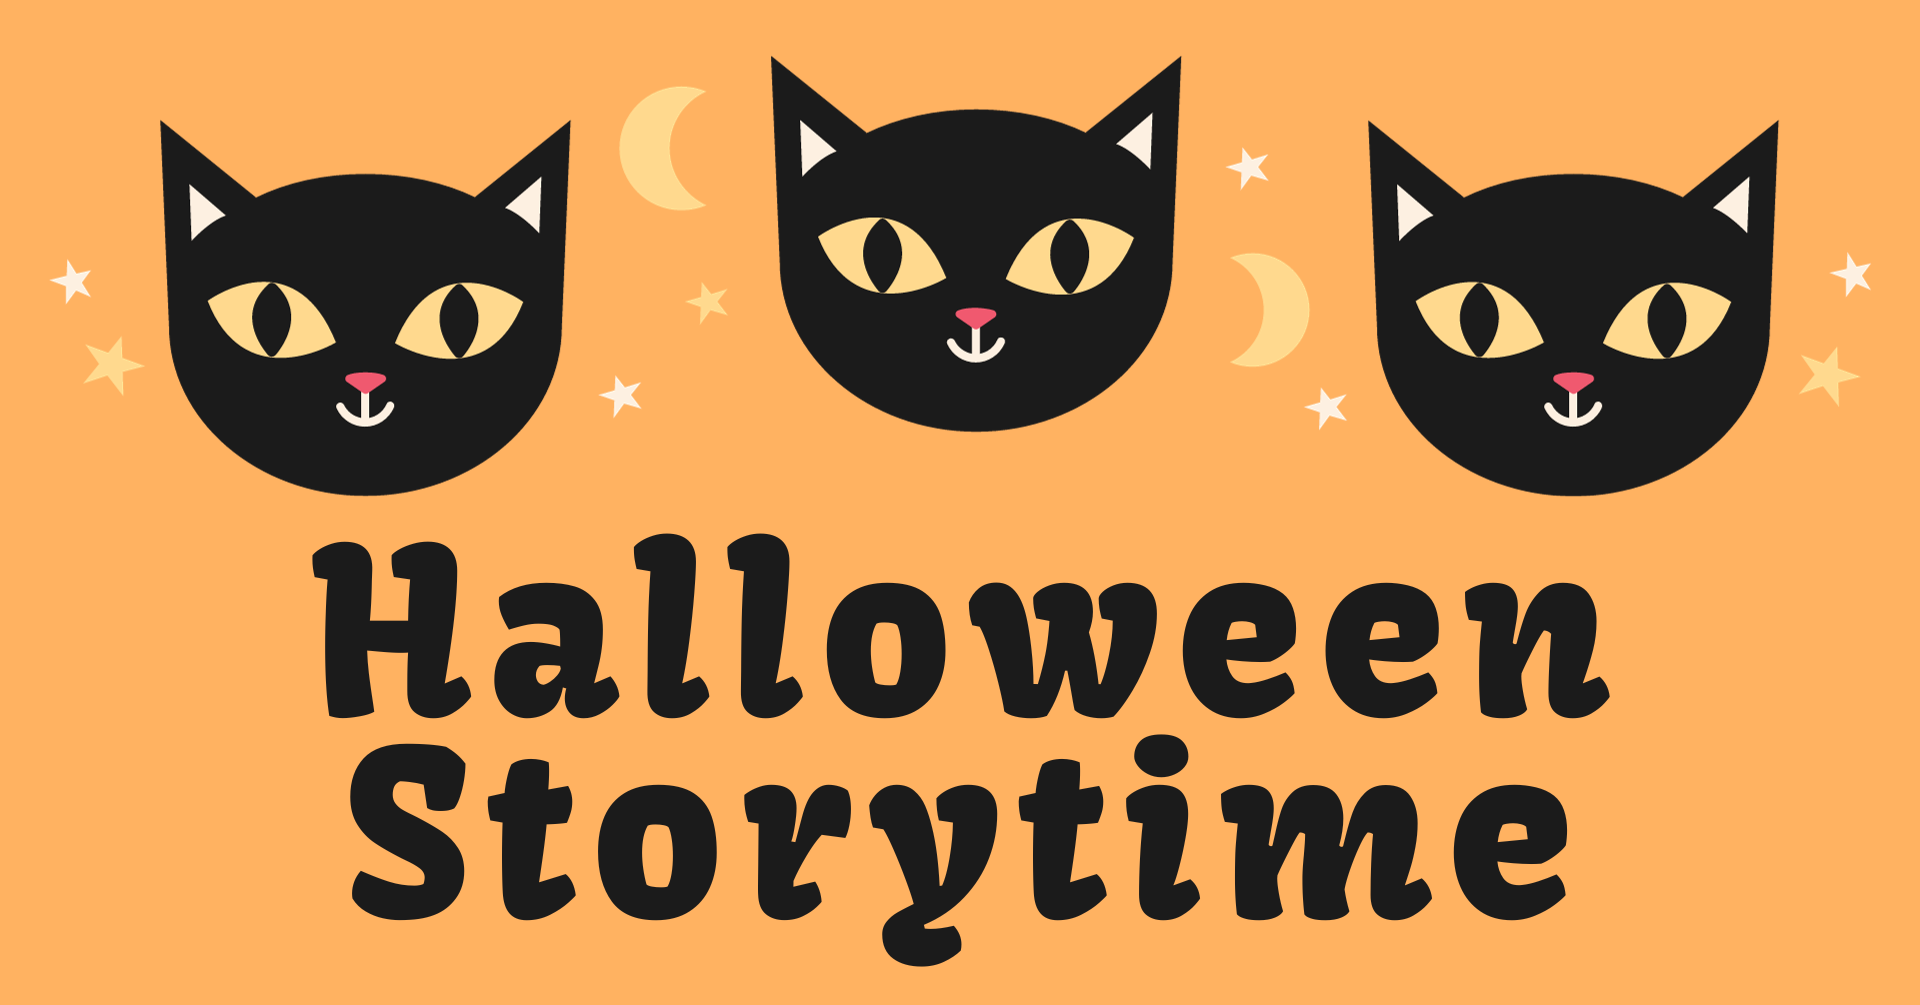 Orange background with three cat graphics above the words Halloween Storytime